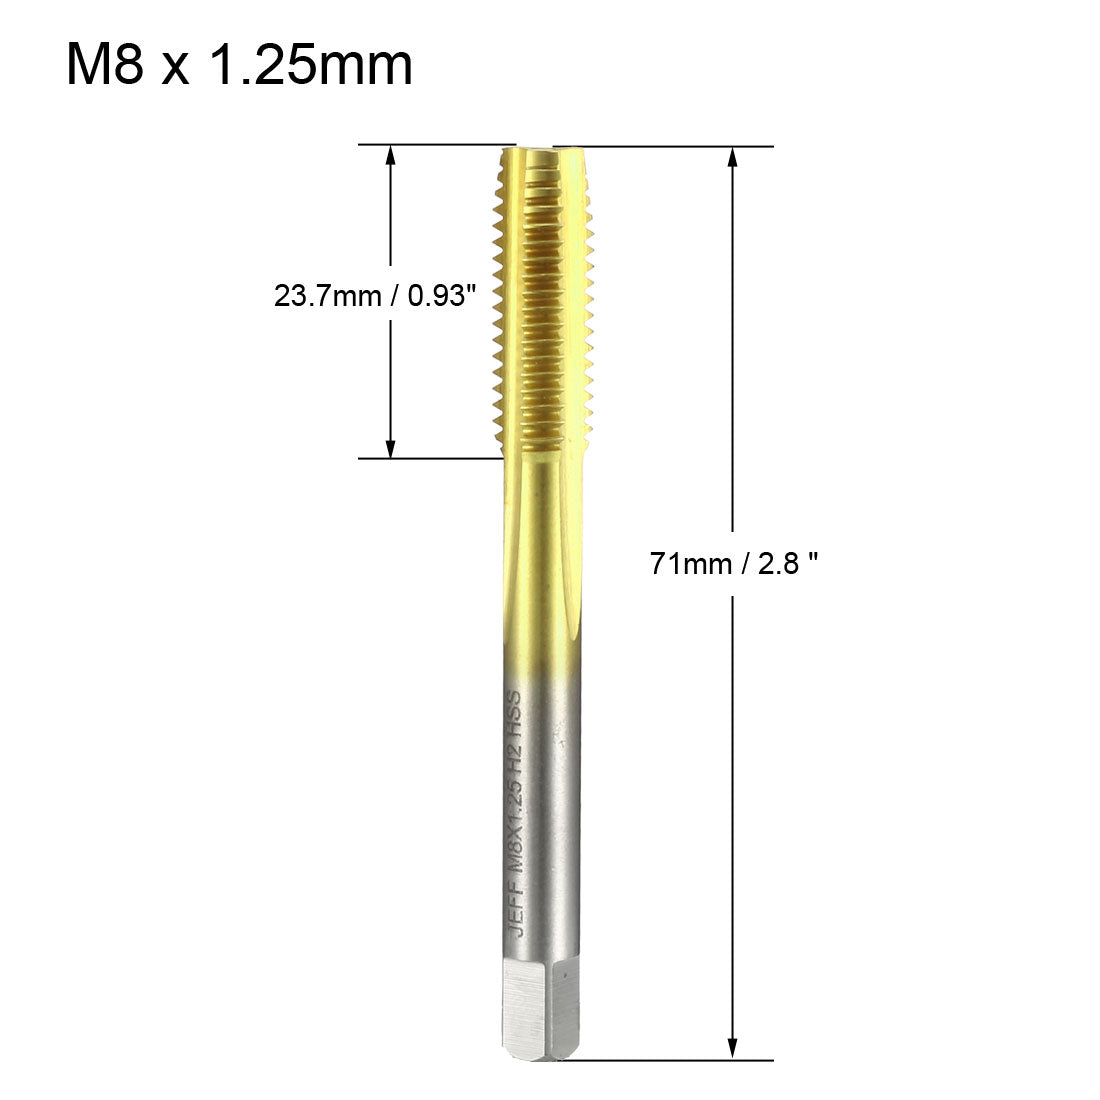 uxcell Uxcell Metric Tap M8 x 1.25 H2 Right Hand Thread Plug Ti-coated for Threading Tapping